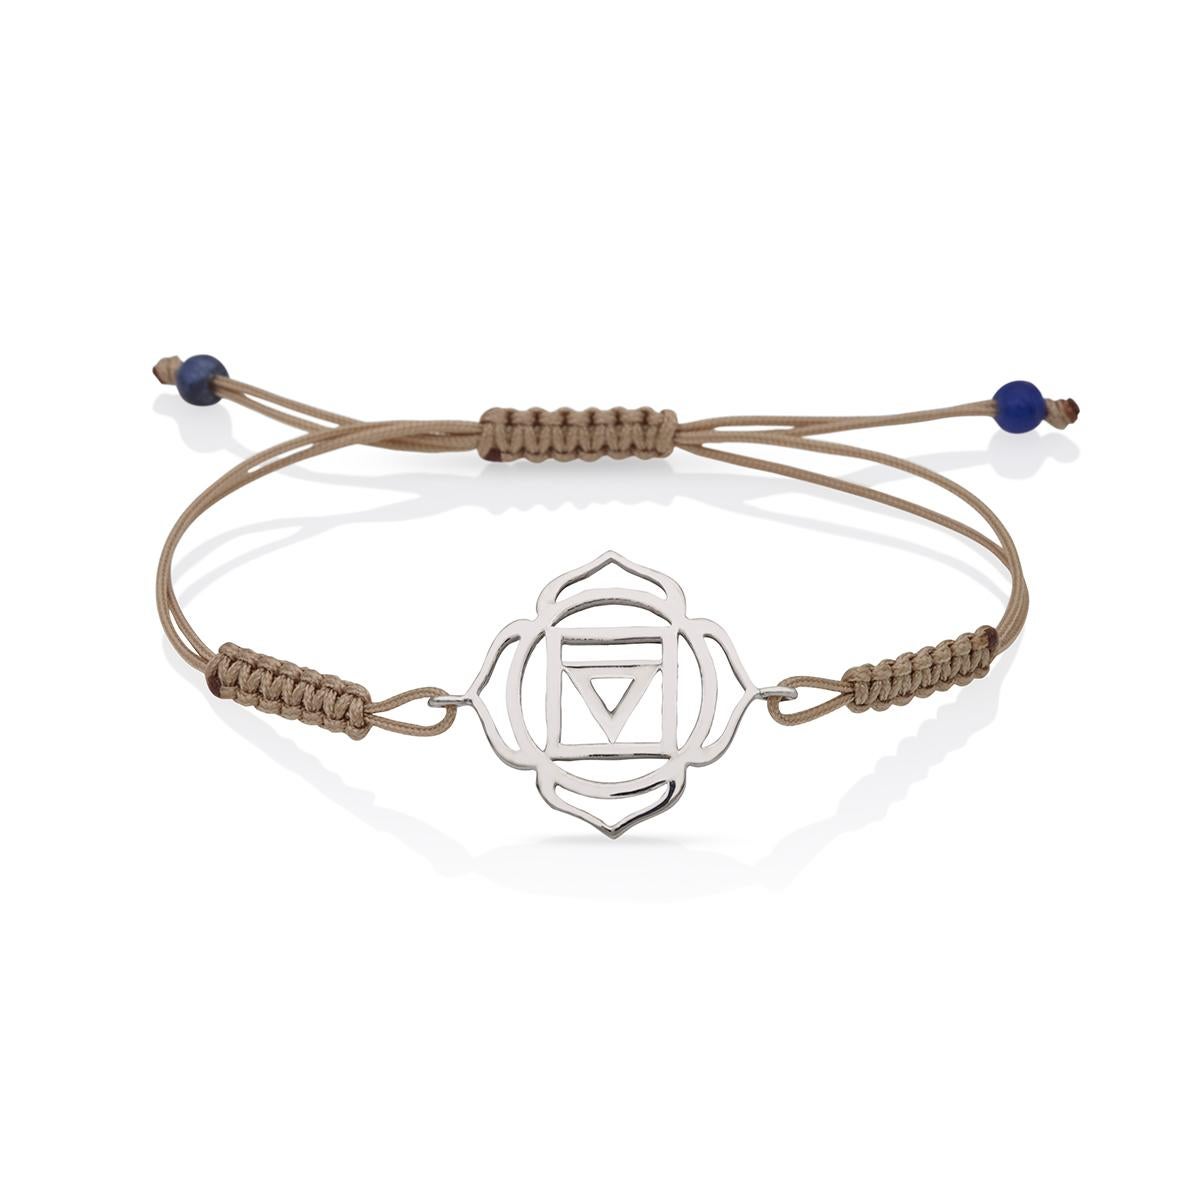 Macrame brown Cord Yoga Bracelet with the Muladhara Root Chakra in 14 Kt white Gold with Lapis Lazuli .
A very beautiful and wearable macrame bracelet made of 14Kt white Gold with the Muladhara Chakra. It will match with everything in your closet.